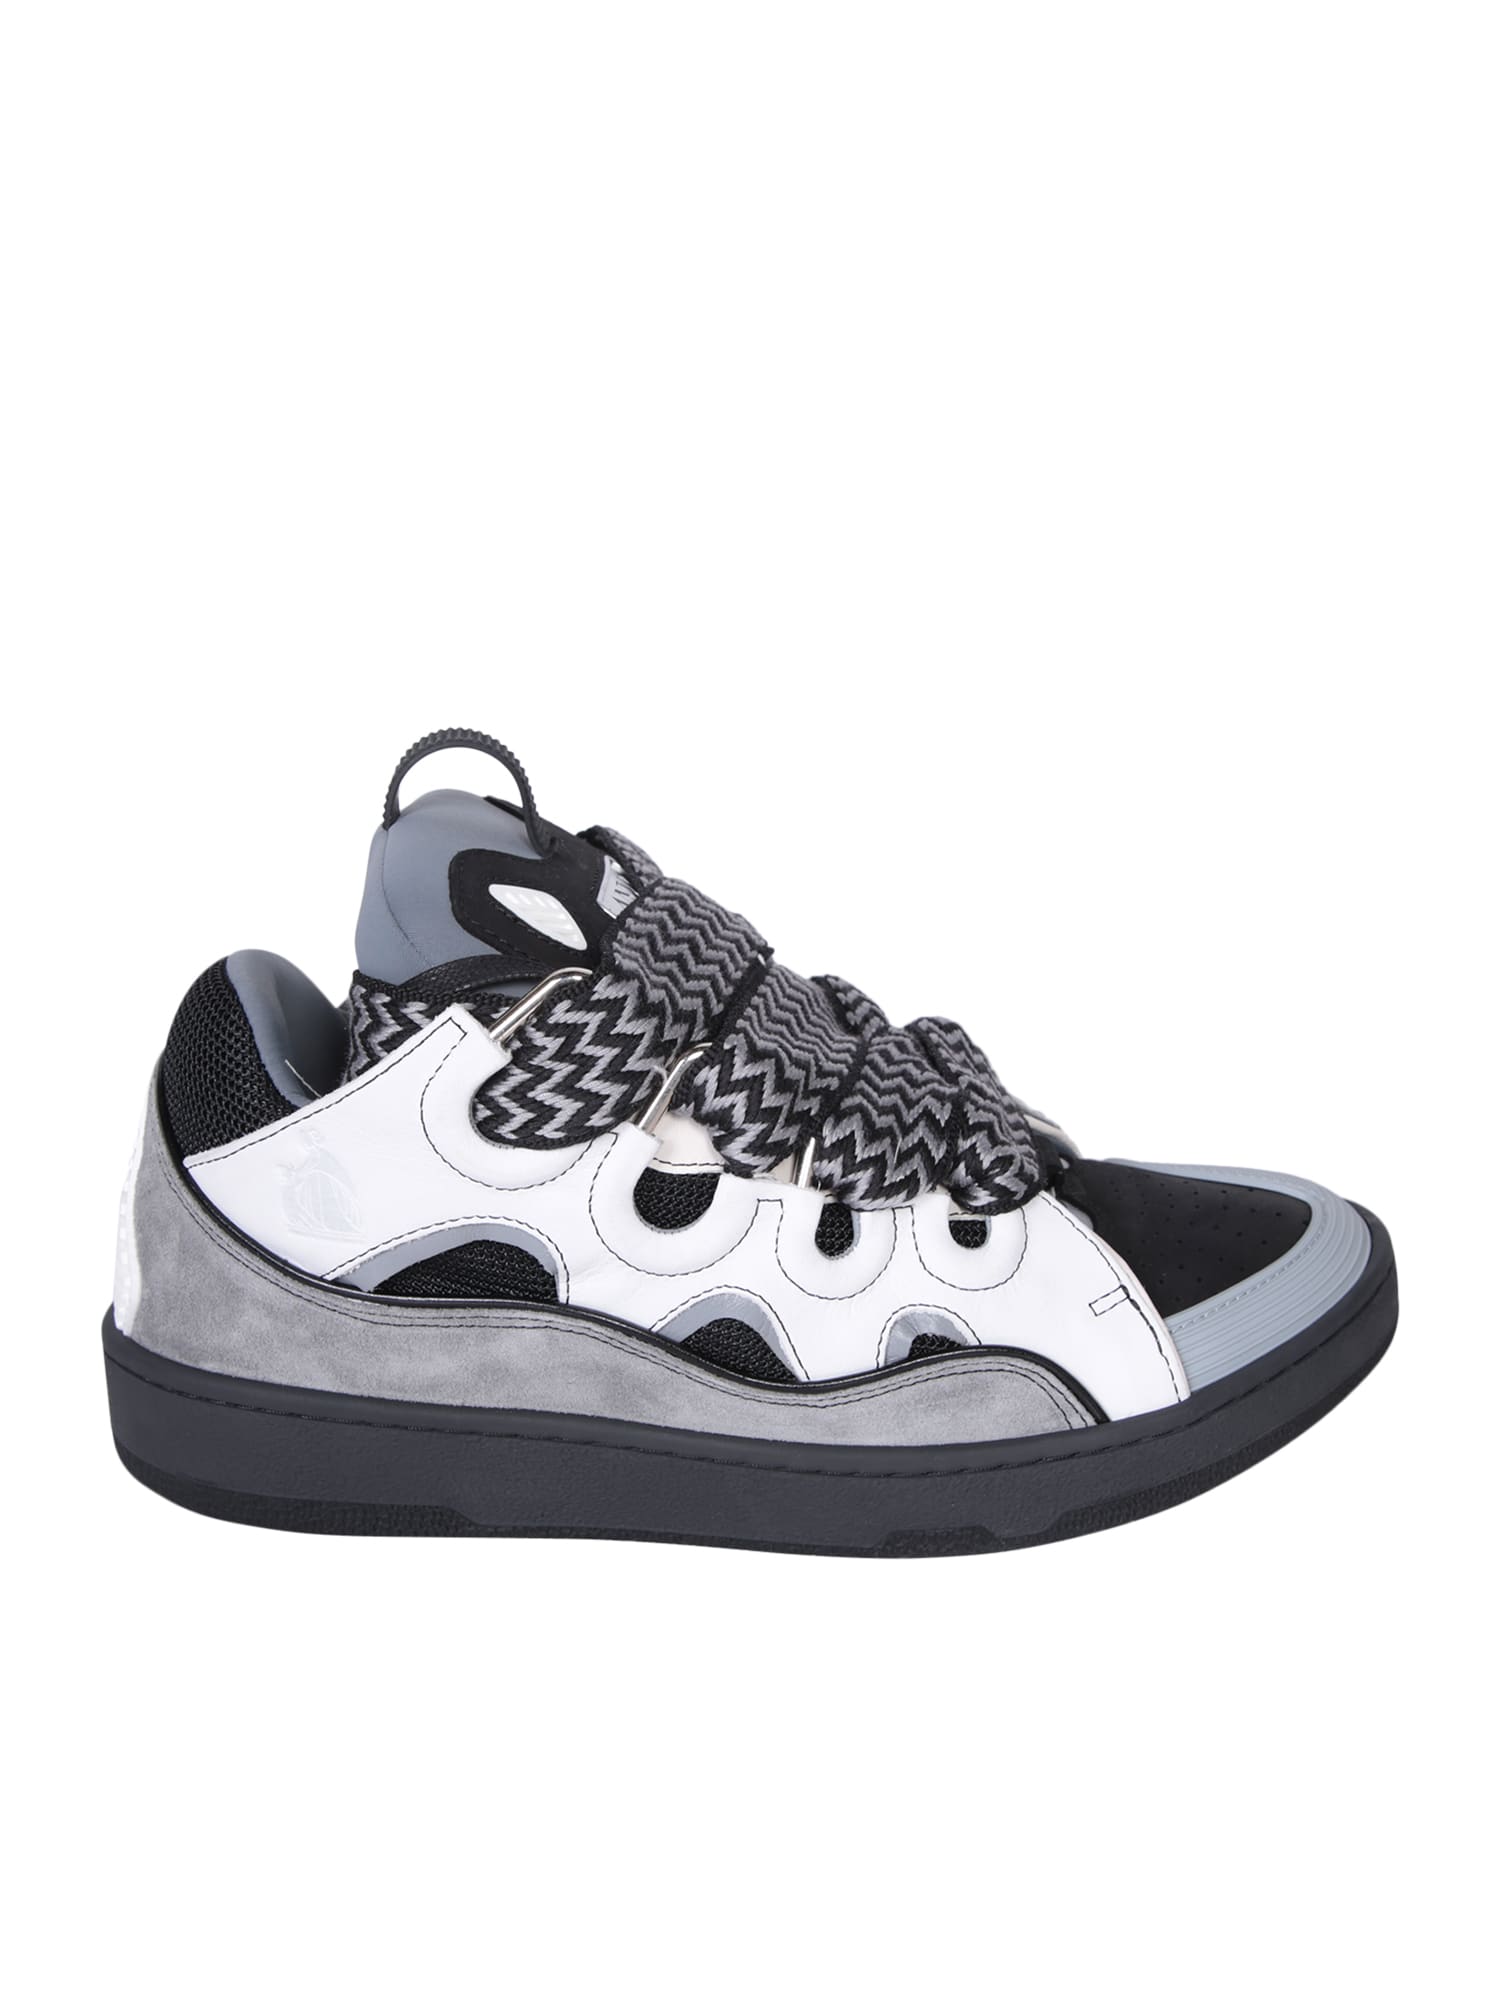 LANVIN CURB WHITE/GREY SNEAKERS